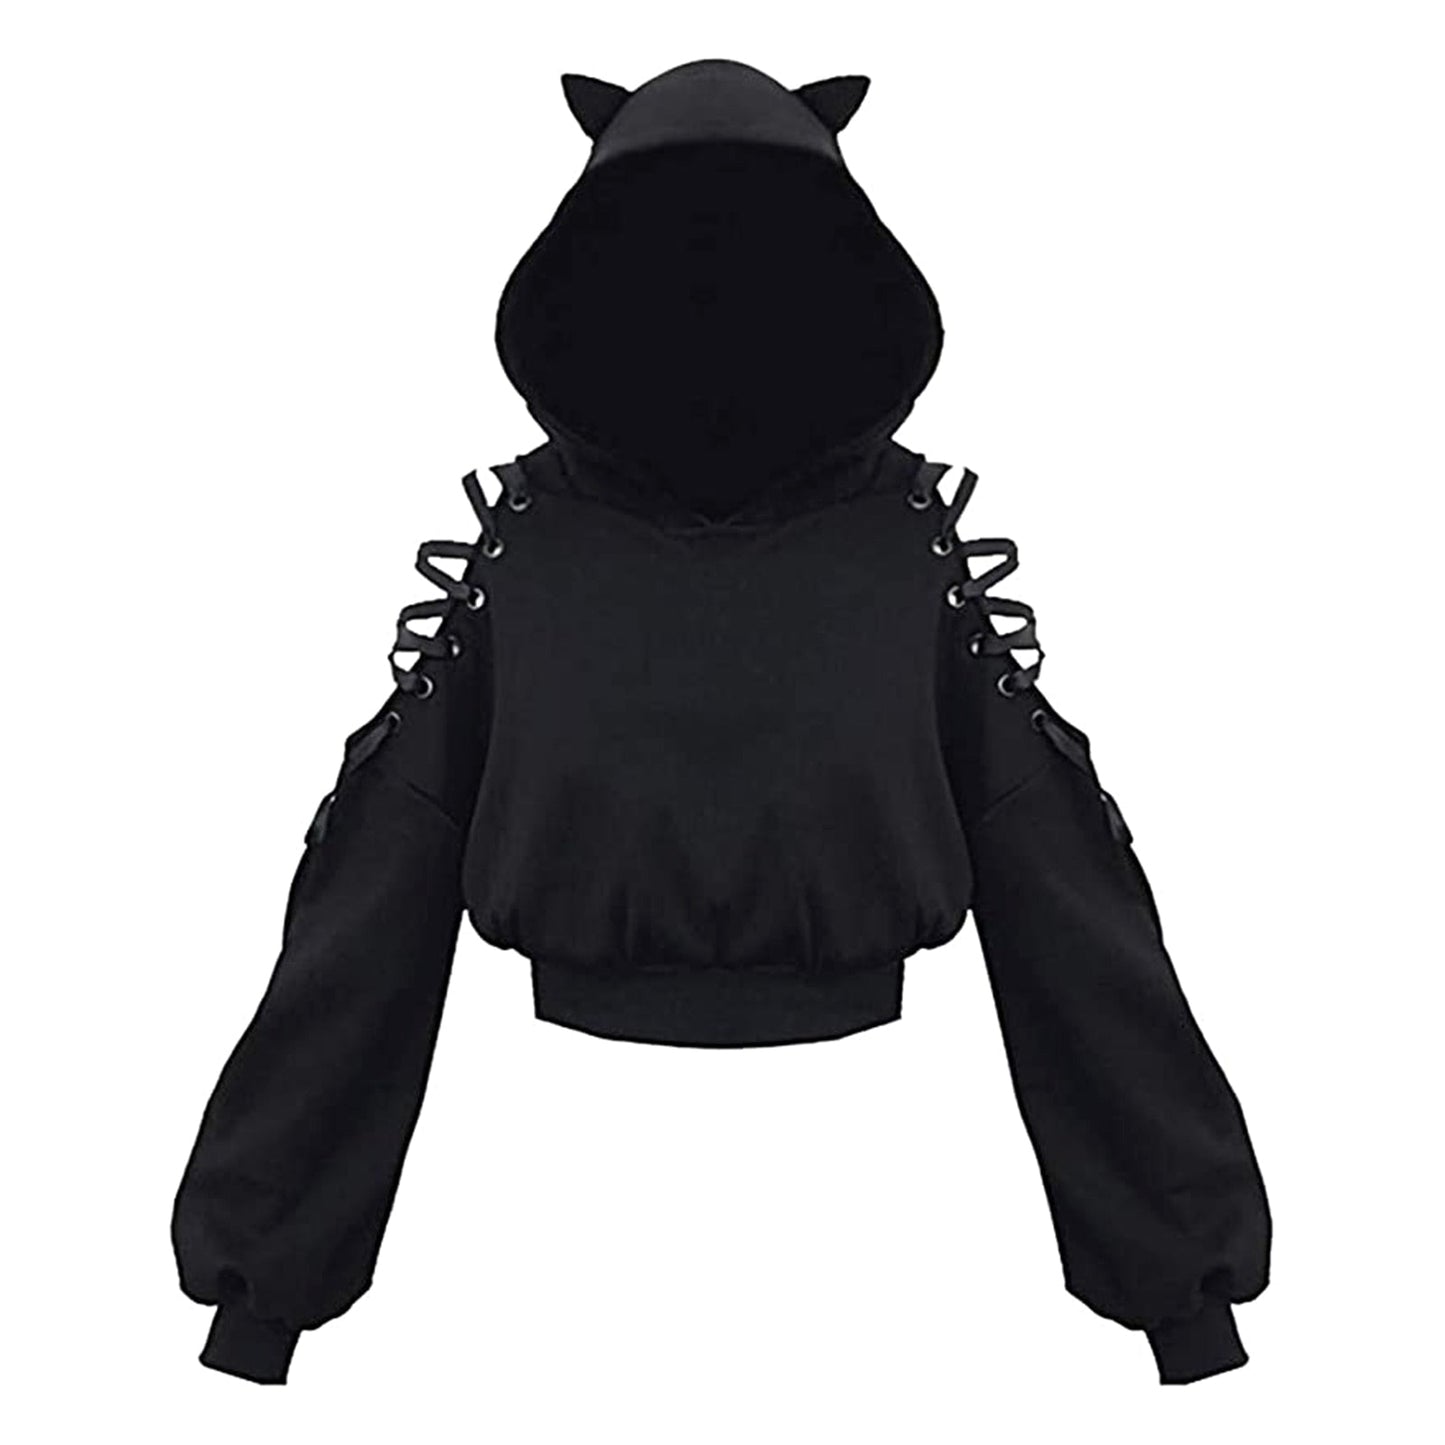 Cool harajuku style female cat hoodie with ear for cat lady